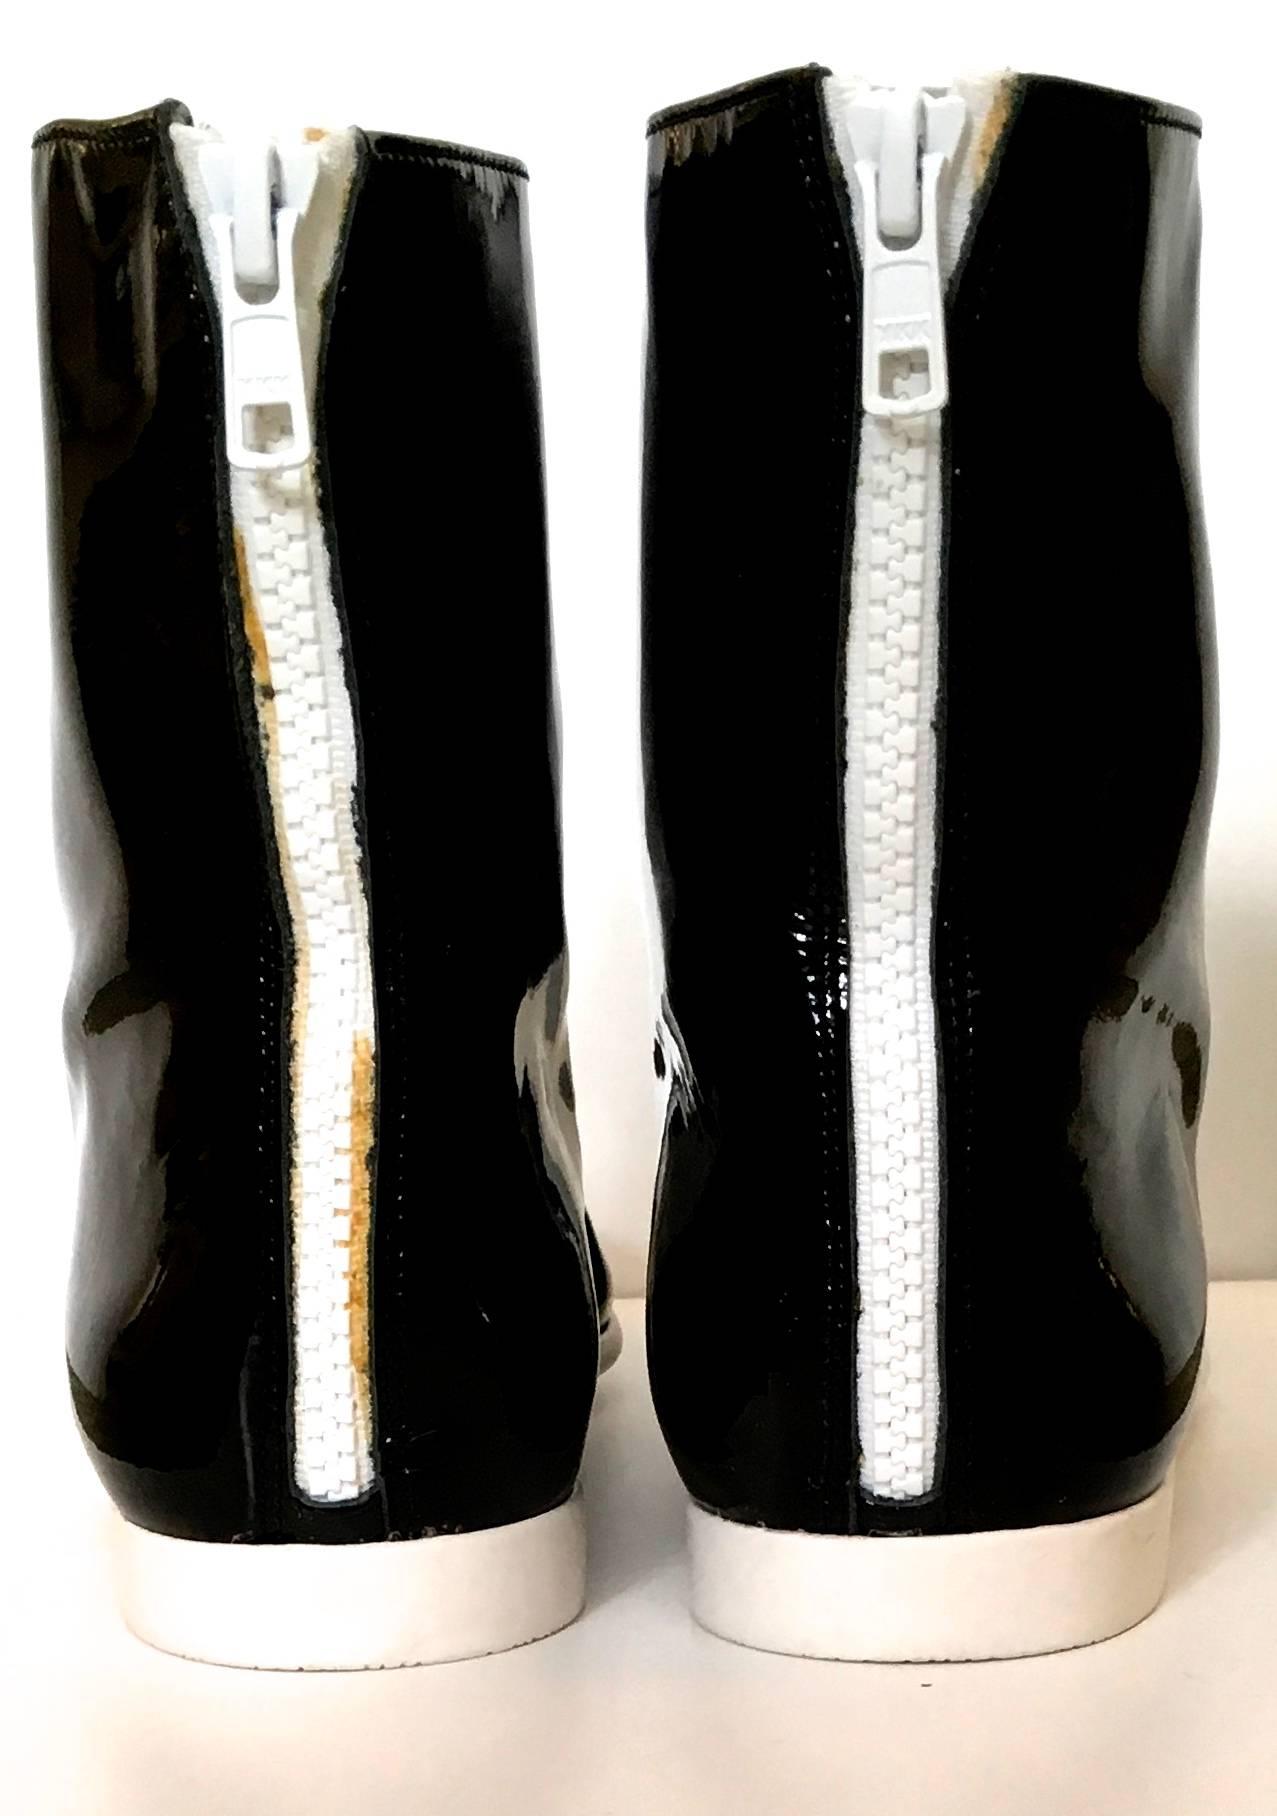 Courreges Boots - Black  Patent  New - Size 38 In New Condition For Sale In Boca Raton, FL